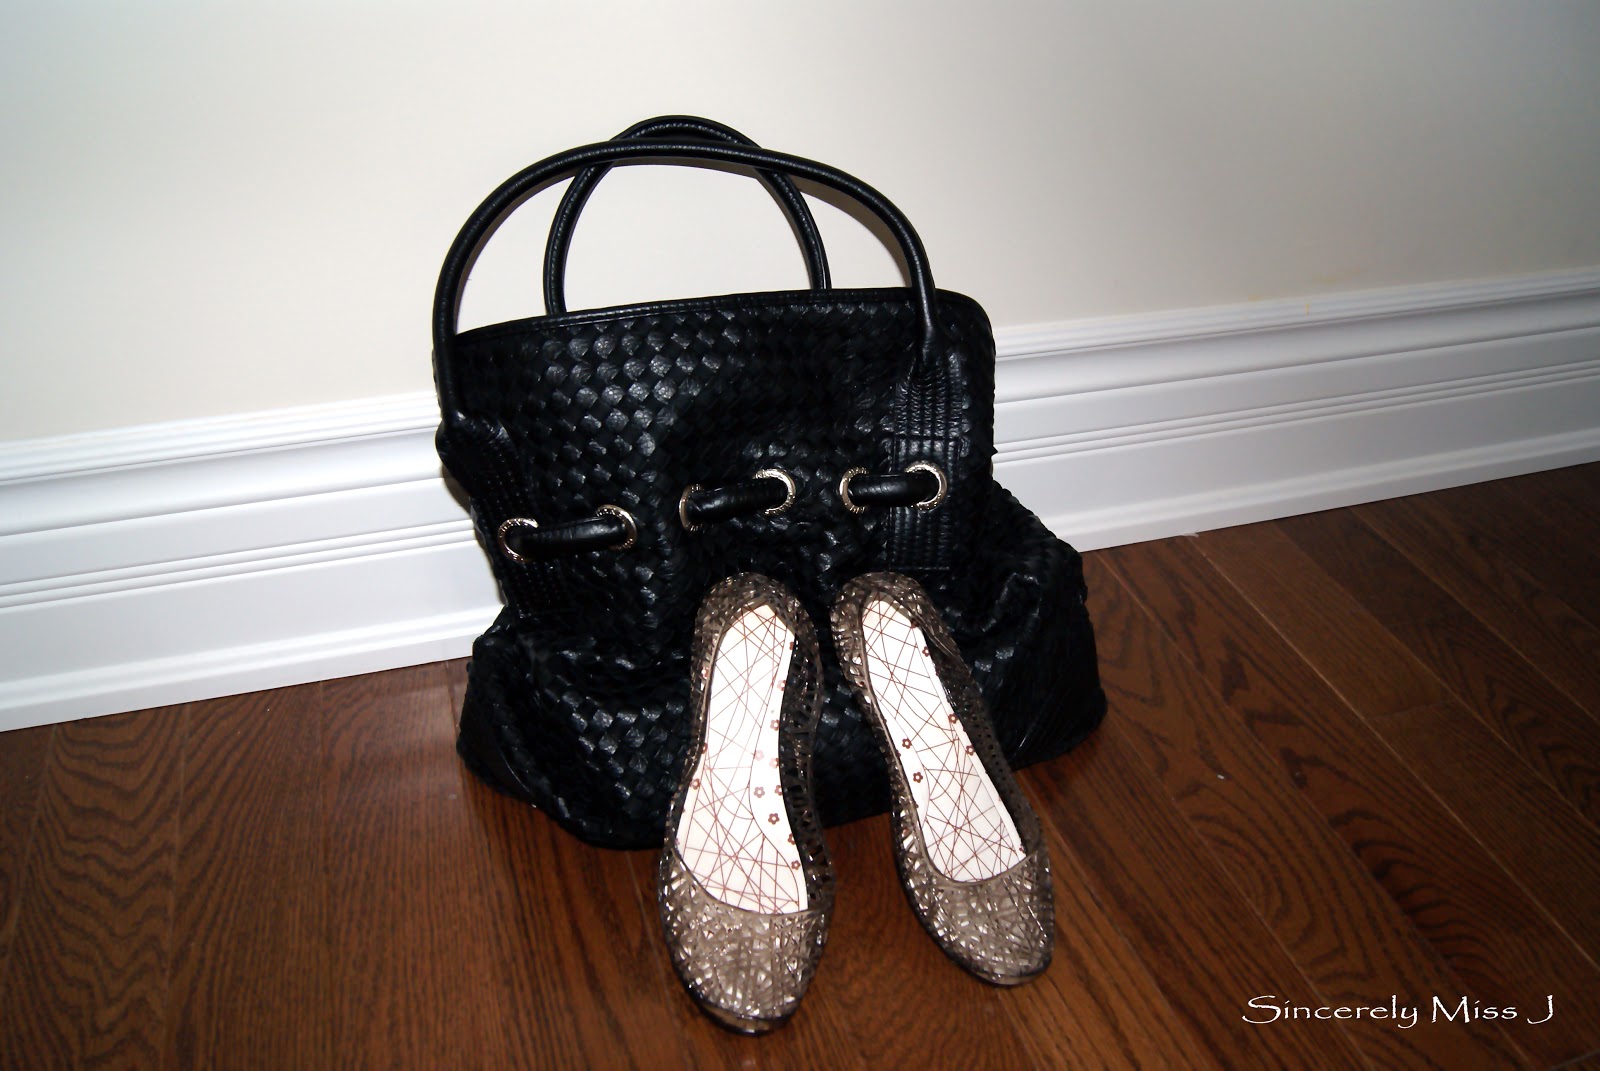 Black bag and beautiful shoes